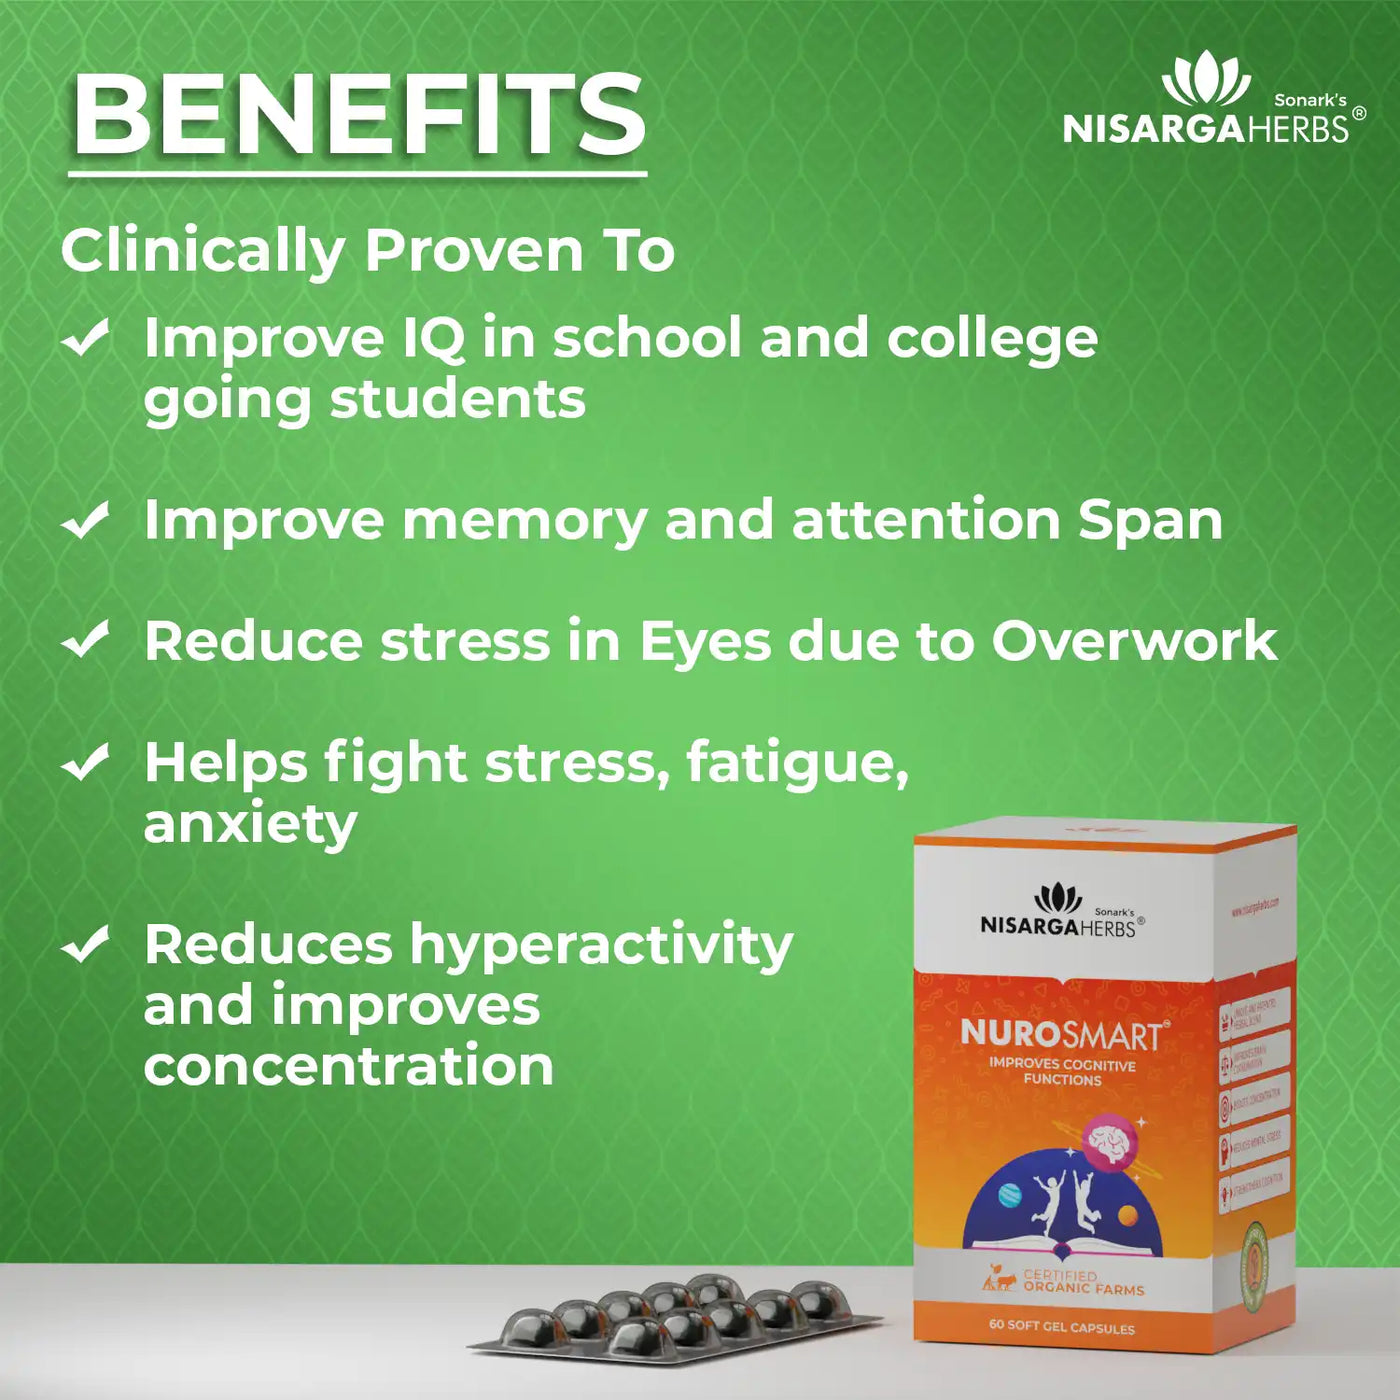 clinically proven benefits of nurosmart capsules in increasing IQ, reduce mental fatigue, increase concentration and attention span in students while reducing ADD/ ADHD symptoms